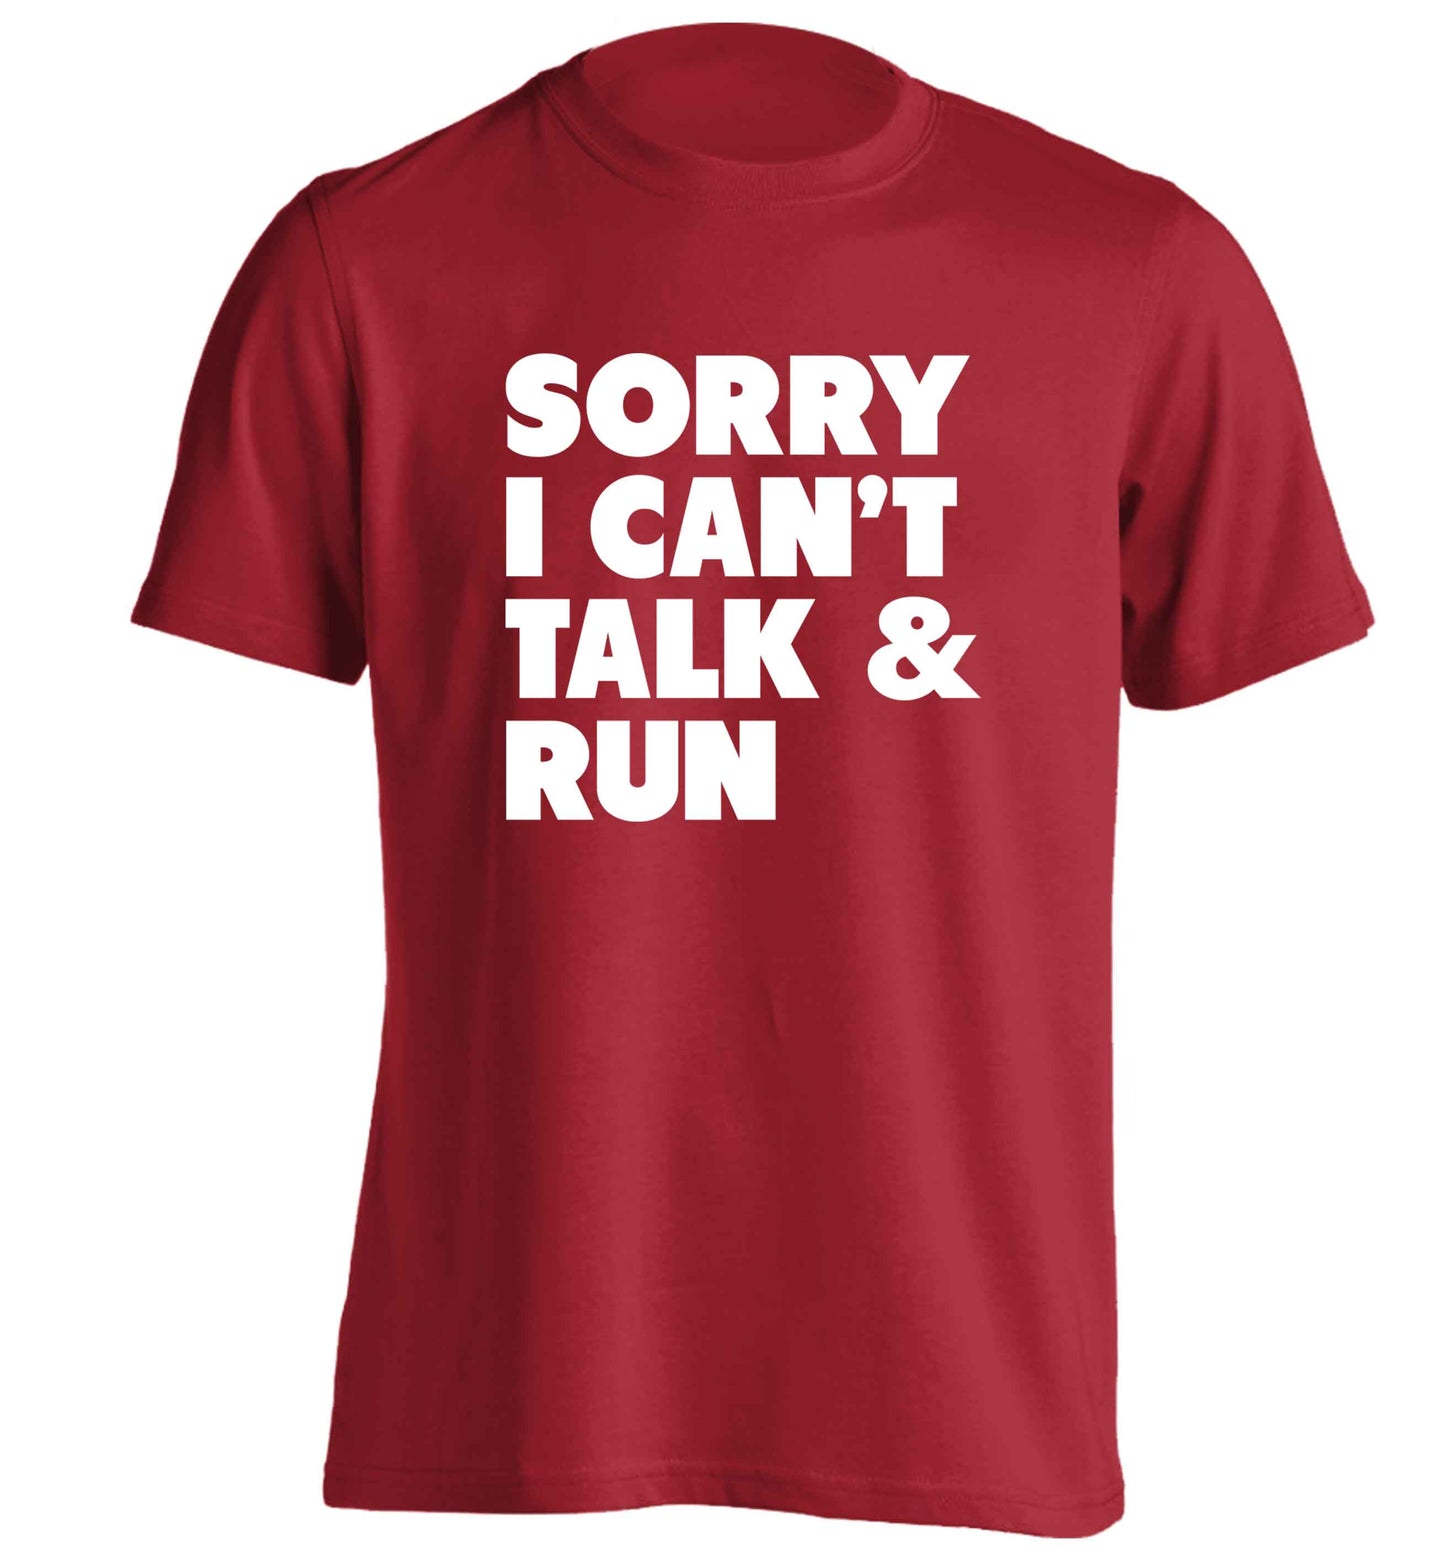 Sorry I can't talk and run adults unisex red Tshirt 2XL